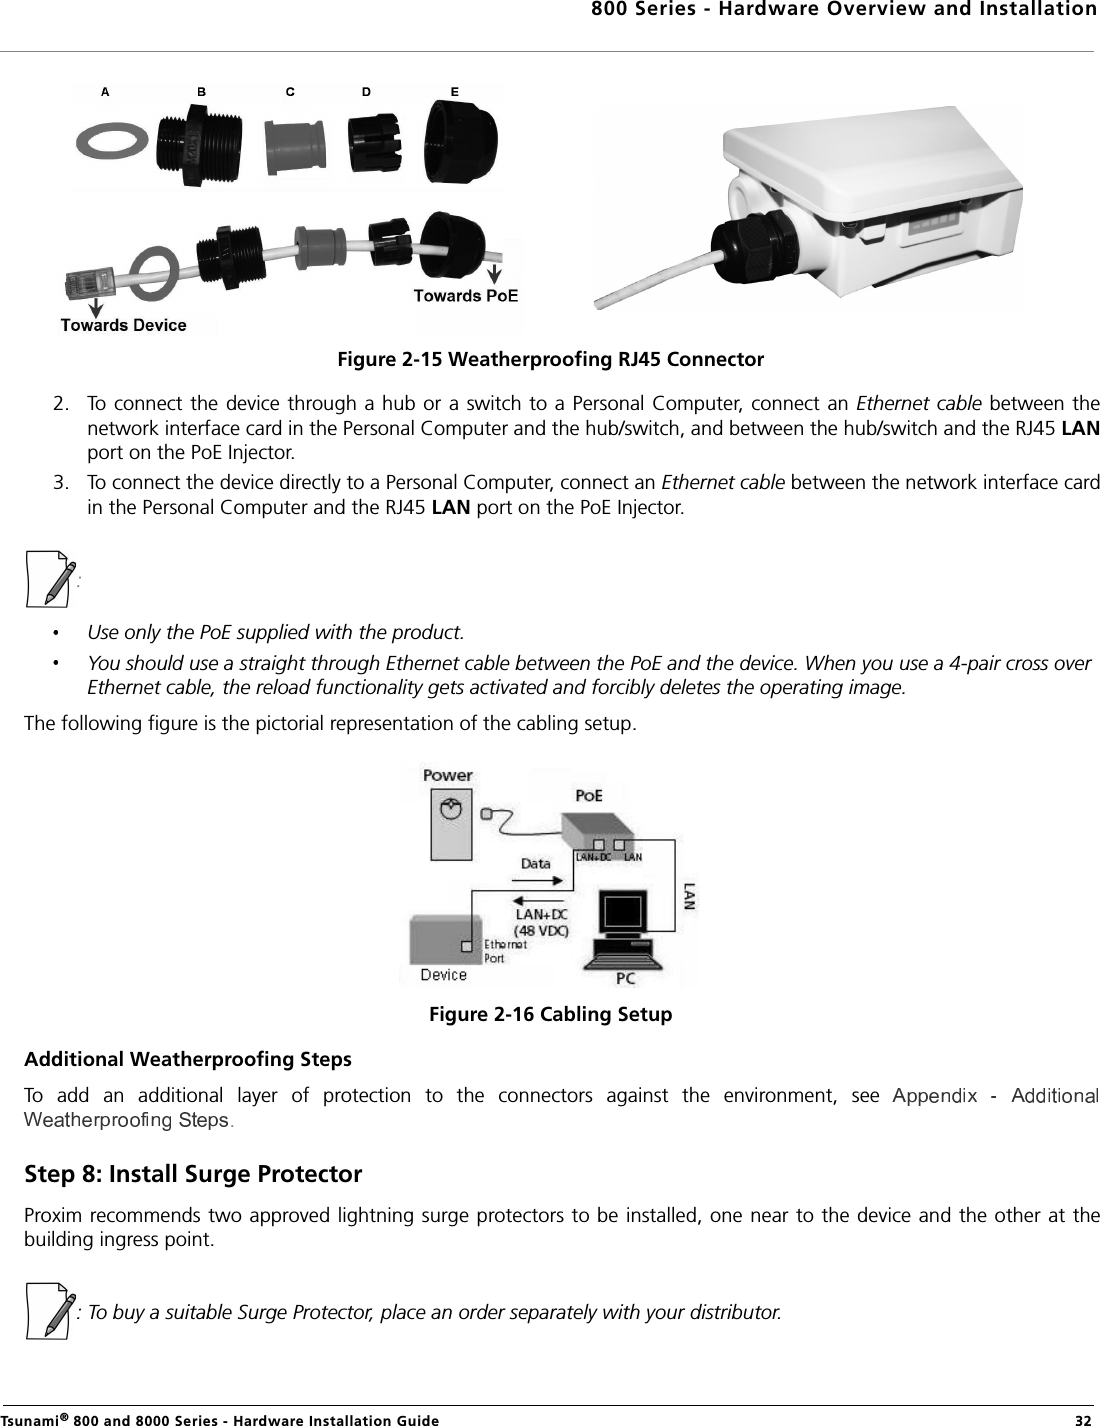 800 Series - Hardware Overview and InstallationTsunami® 800 and 8000 Series - Hardware Installation Guide  32Figure 2-15 Weatherproofing RJ45 Connector2. To connect the device through a hub or a switch to a Personal Computer, connect an Ethernet cable between thenetwork interface card in the Personal Computer and the hub/switch, and between the hub/switch and the RJ45 LANport on the PoE Injector. 3. To connect the device directly to a Personal Computer, connect an Ethernet cable between the network interface cardin the Personal Computer and the RJ45 LAN port on the PoE Injector.: Use only the PoE supplied with the product. You should use a straight through Ethernet cable between the PoE and the device. When you use a 4-pair cross over Ethernet cable, the reload functionality gets activated and forcibly deletes the operating image.The following figure is the pictorial representation of the cabling setup.Figure 2-16 Cabling SetupAdditional Weatherproofing StepsTo  add  an  additional  layer  of  protection  to  the  connectors  against  the  environment,  see .Step 8: Install Surge ProtectorProxim recommends two approved lightning surge protectors to be installed, one near to the device and the other at thebuilding ingress point.: To buy a suitable Surge Protector, place an order separately with your distributor. 